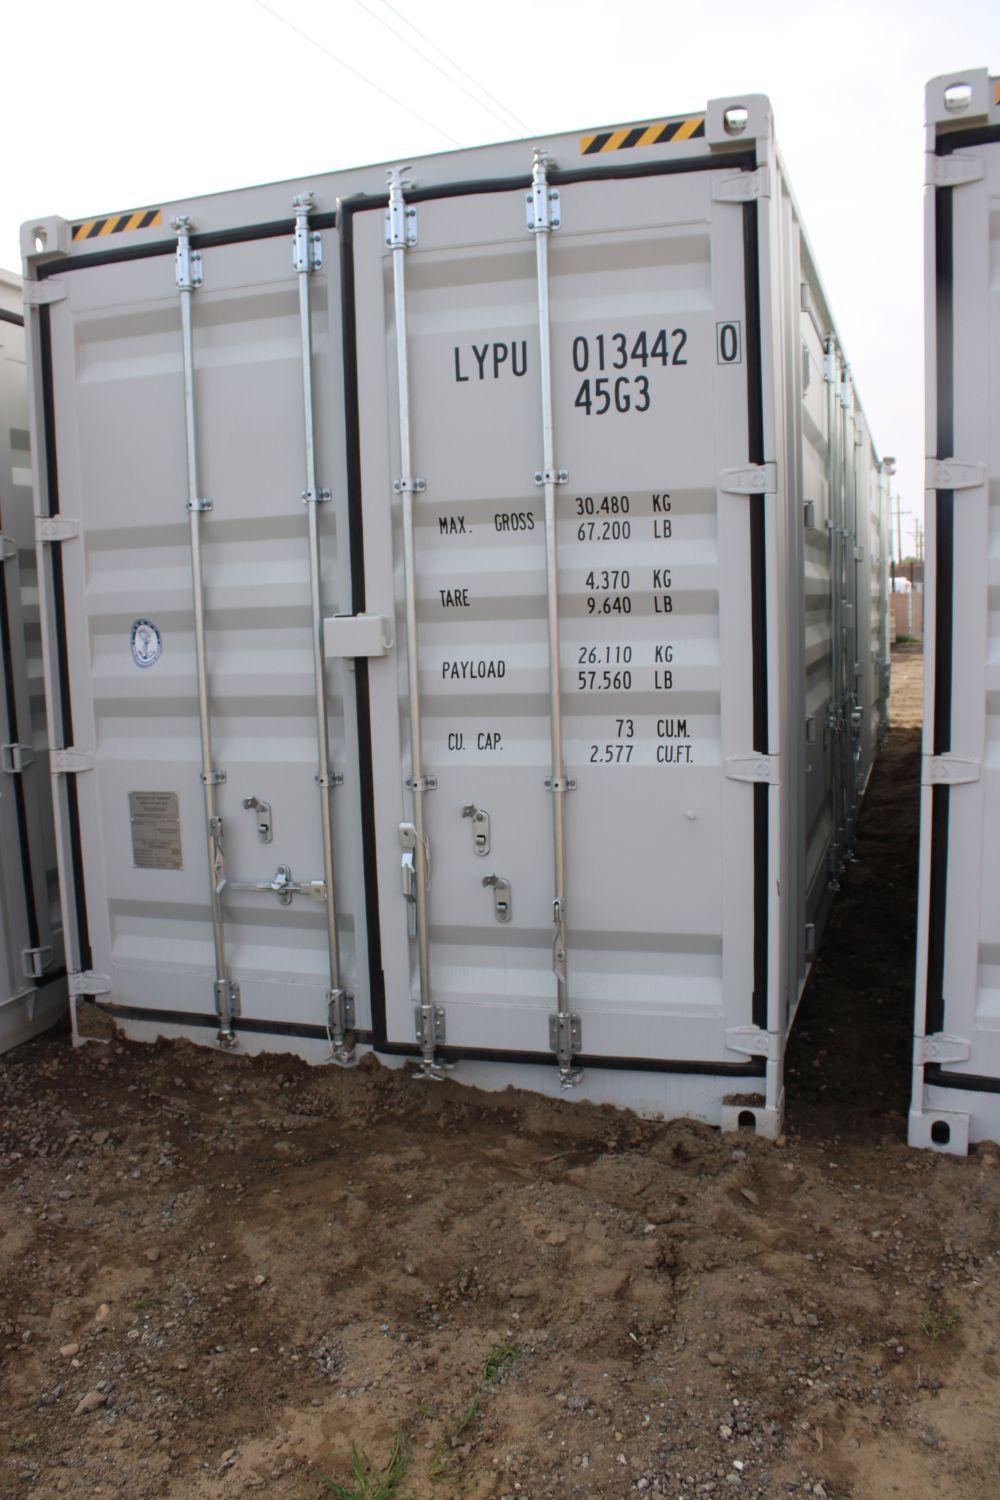 40ft High Cube Container (2) Doors